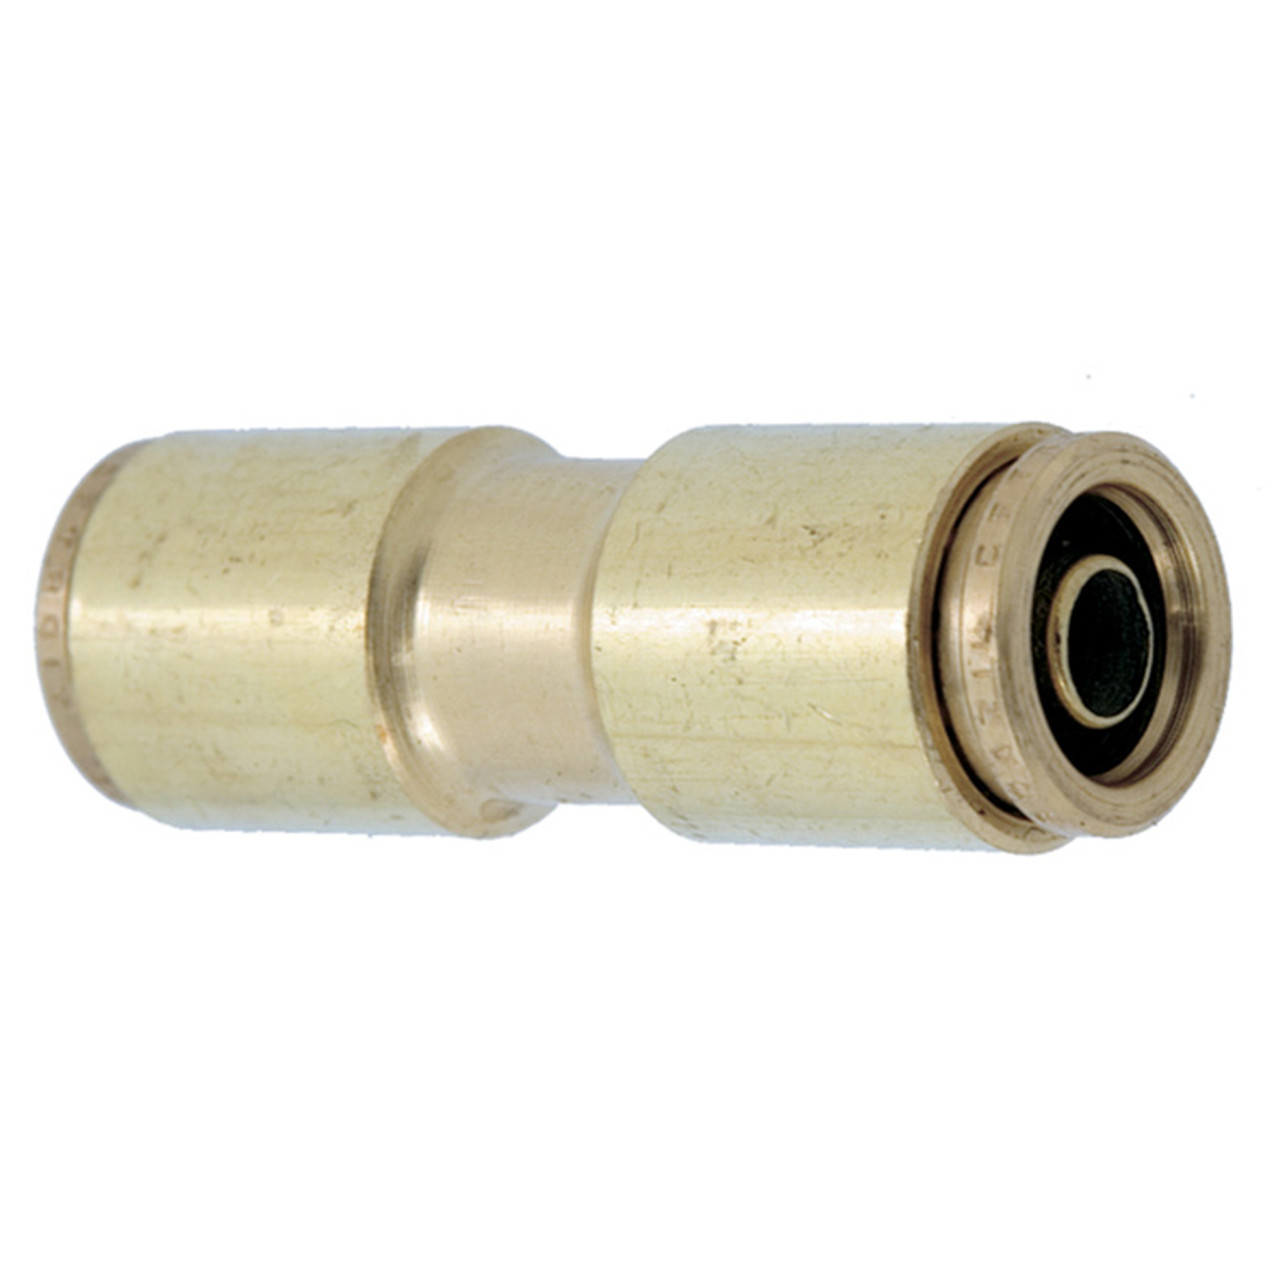 1/4" Brass DOT Push-To-Connect Union   G7070P-04-04